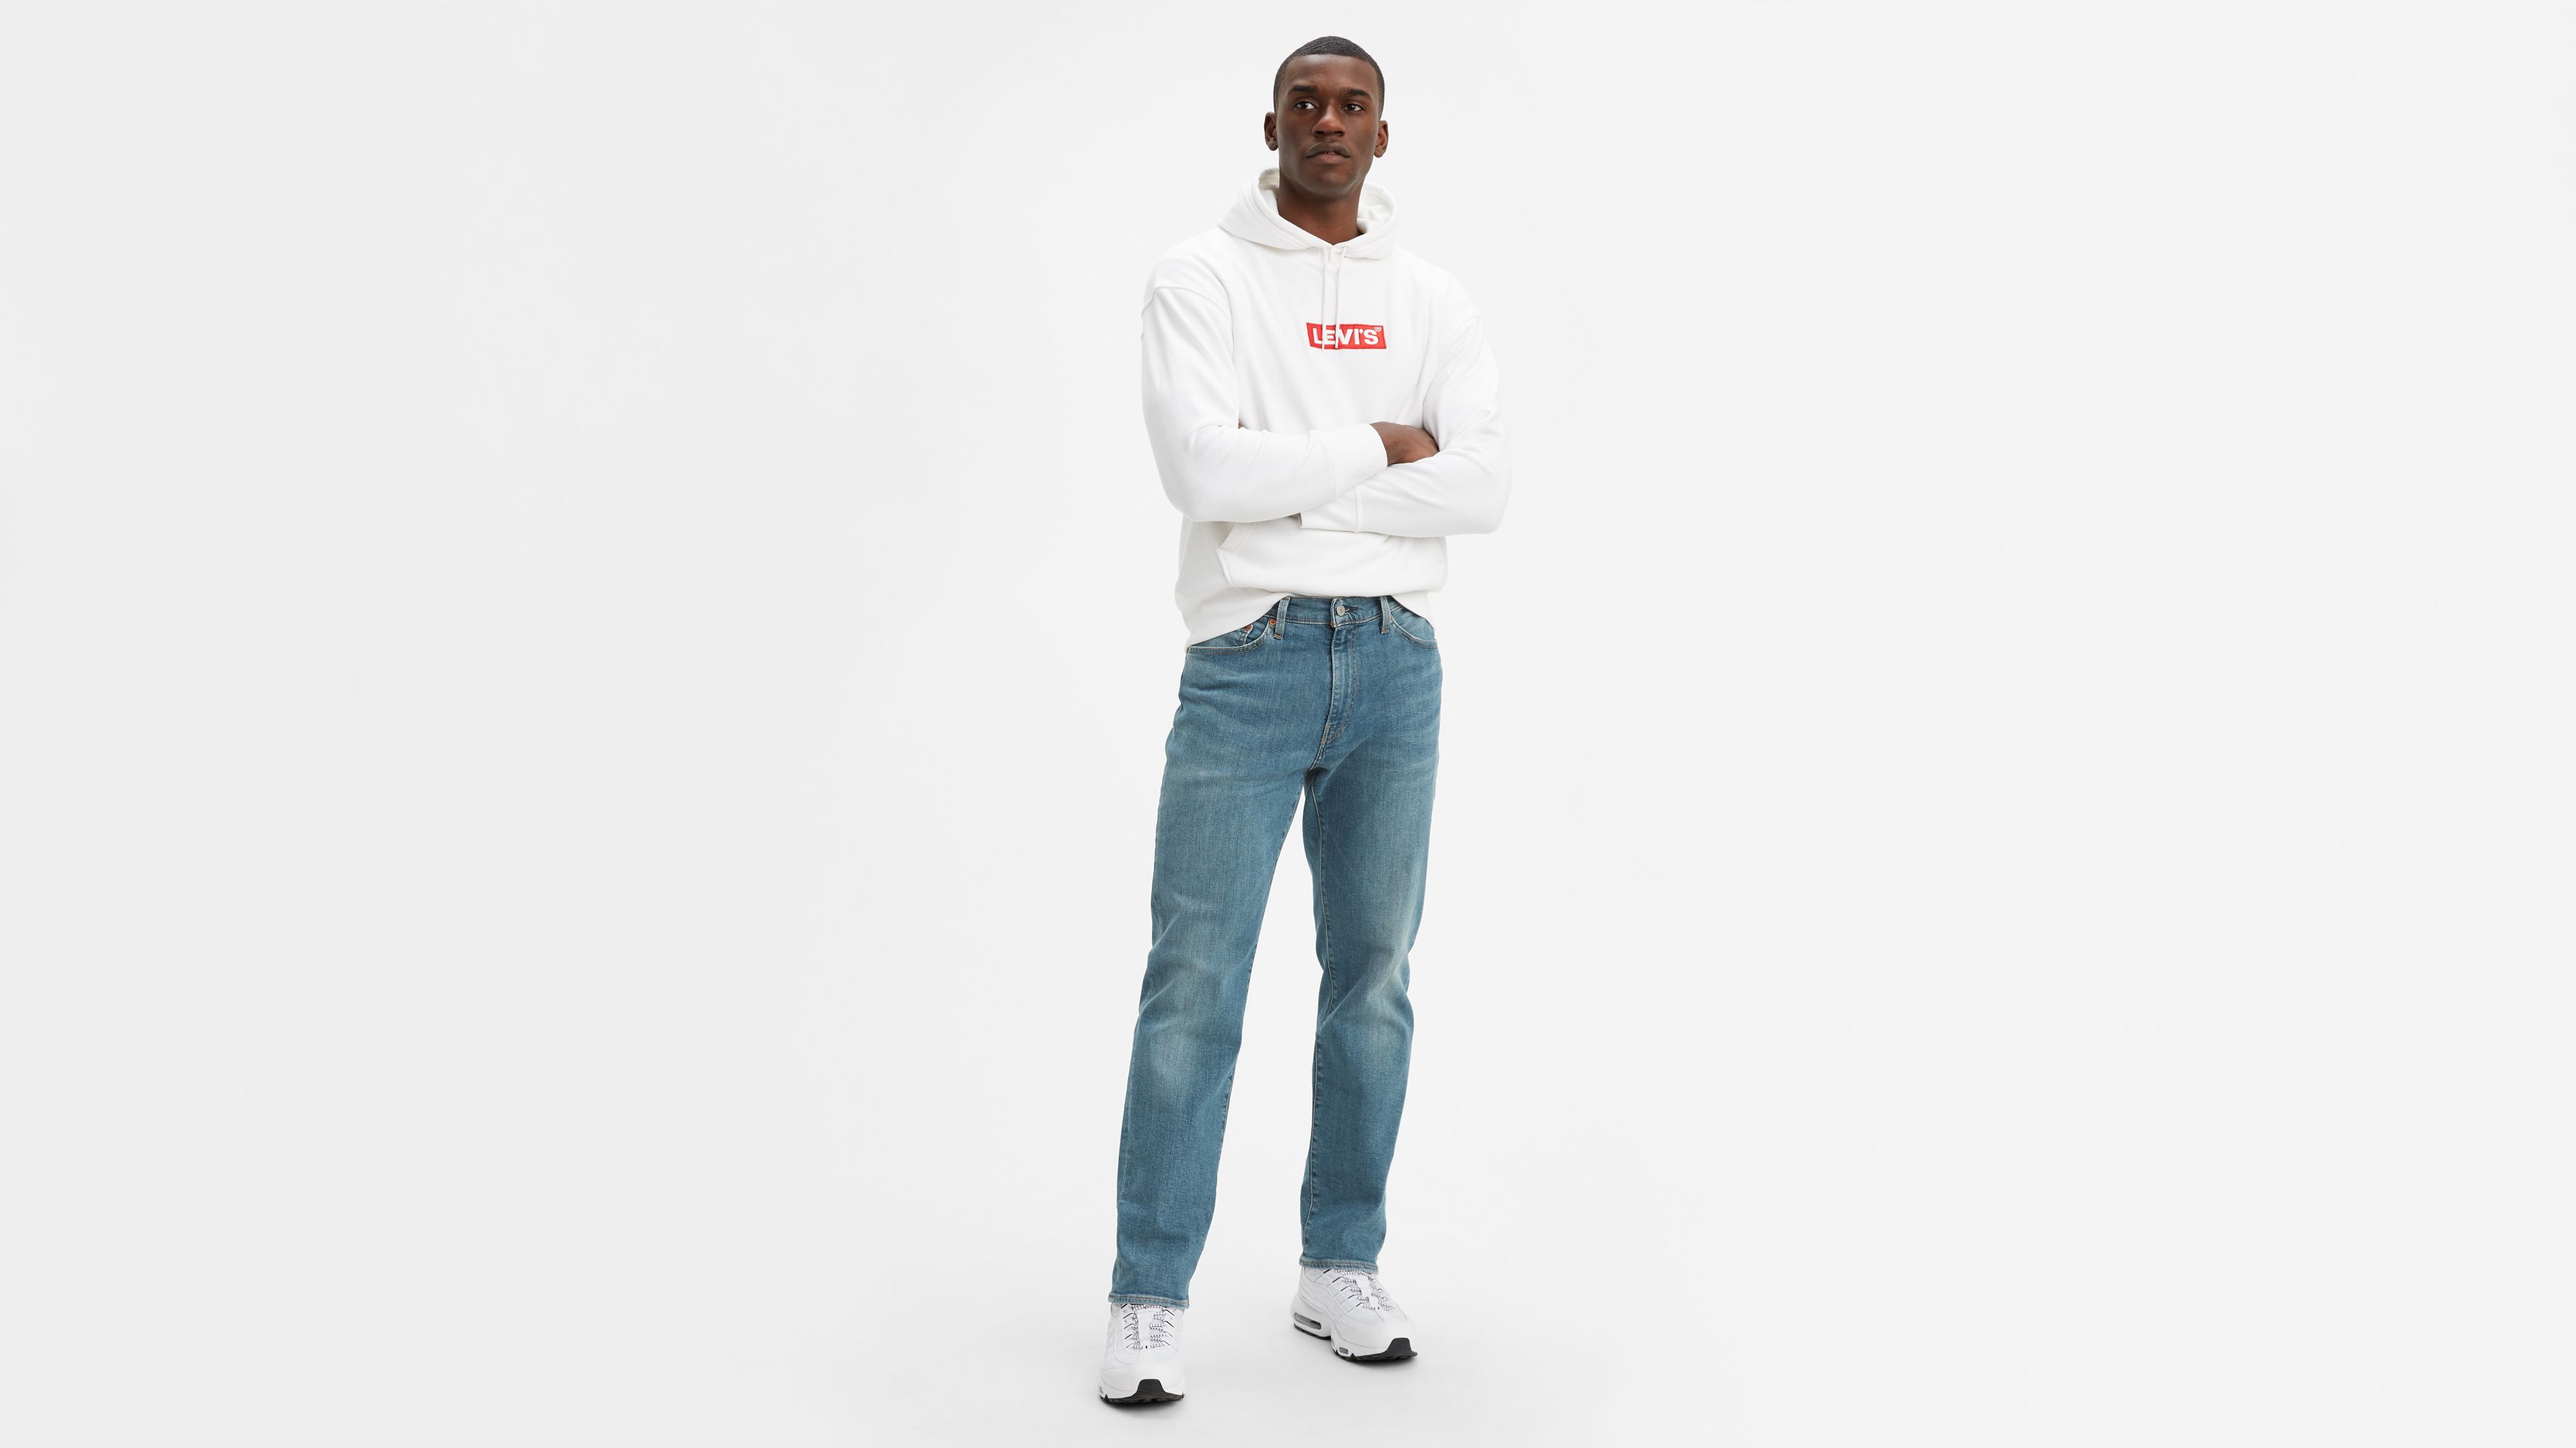 levi's athletic taper jeans